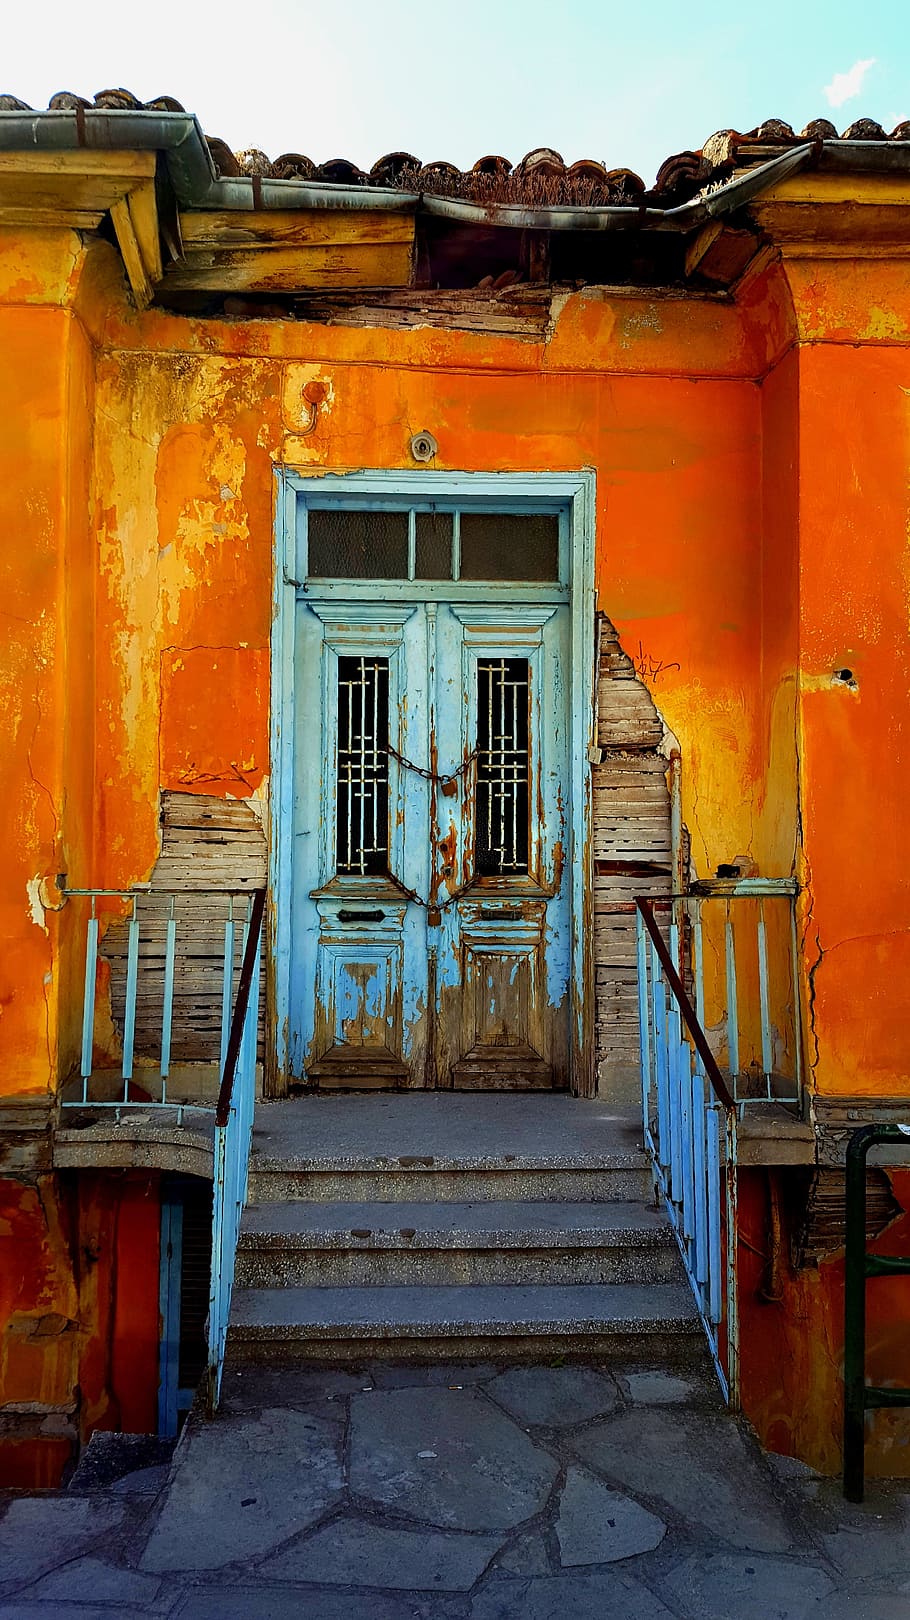 door, house, castle, chain, color, orange, blue, stairs, railings, old